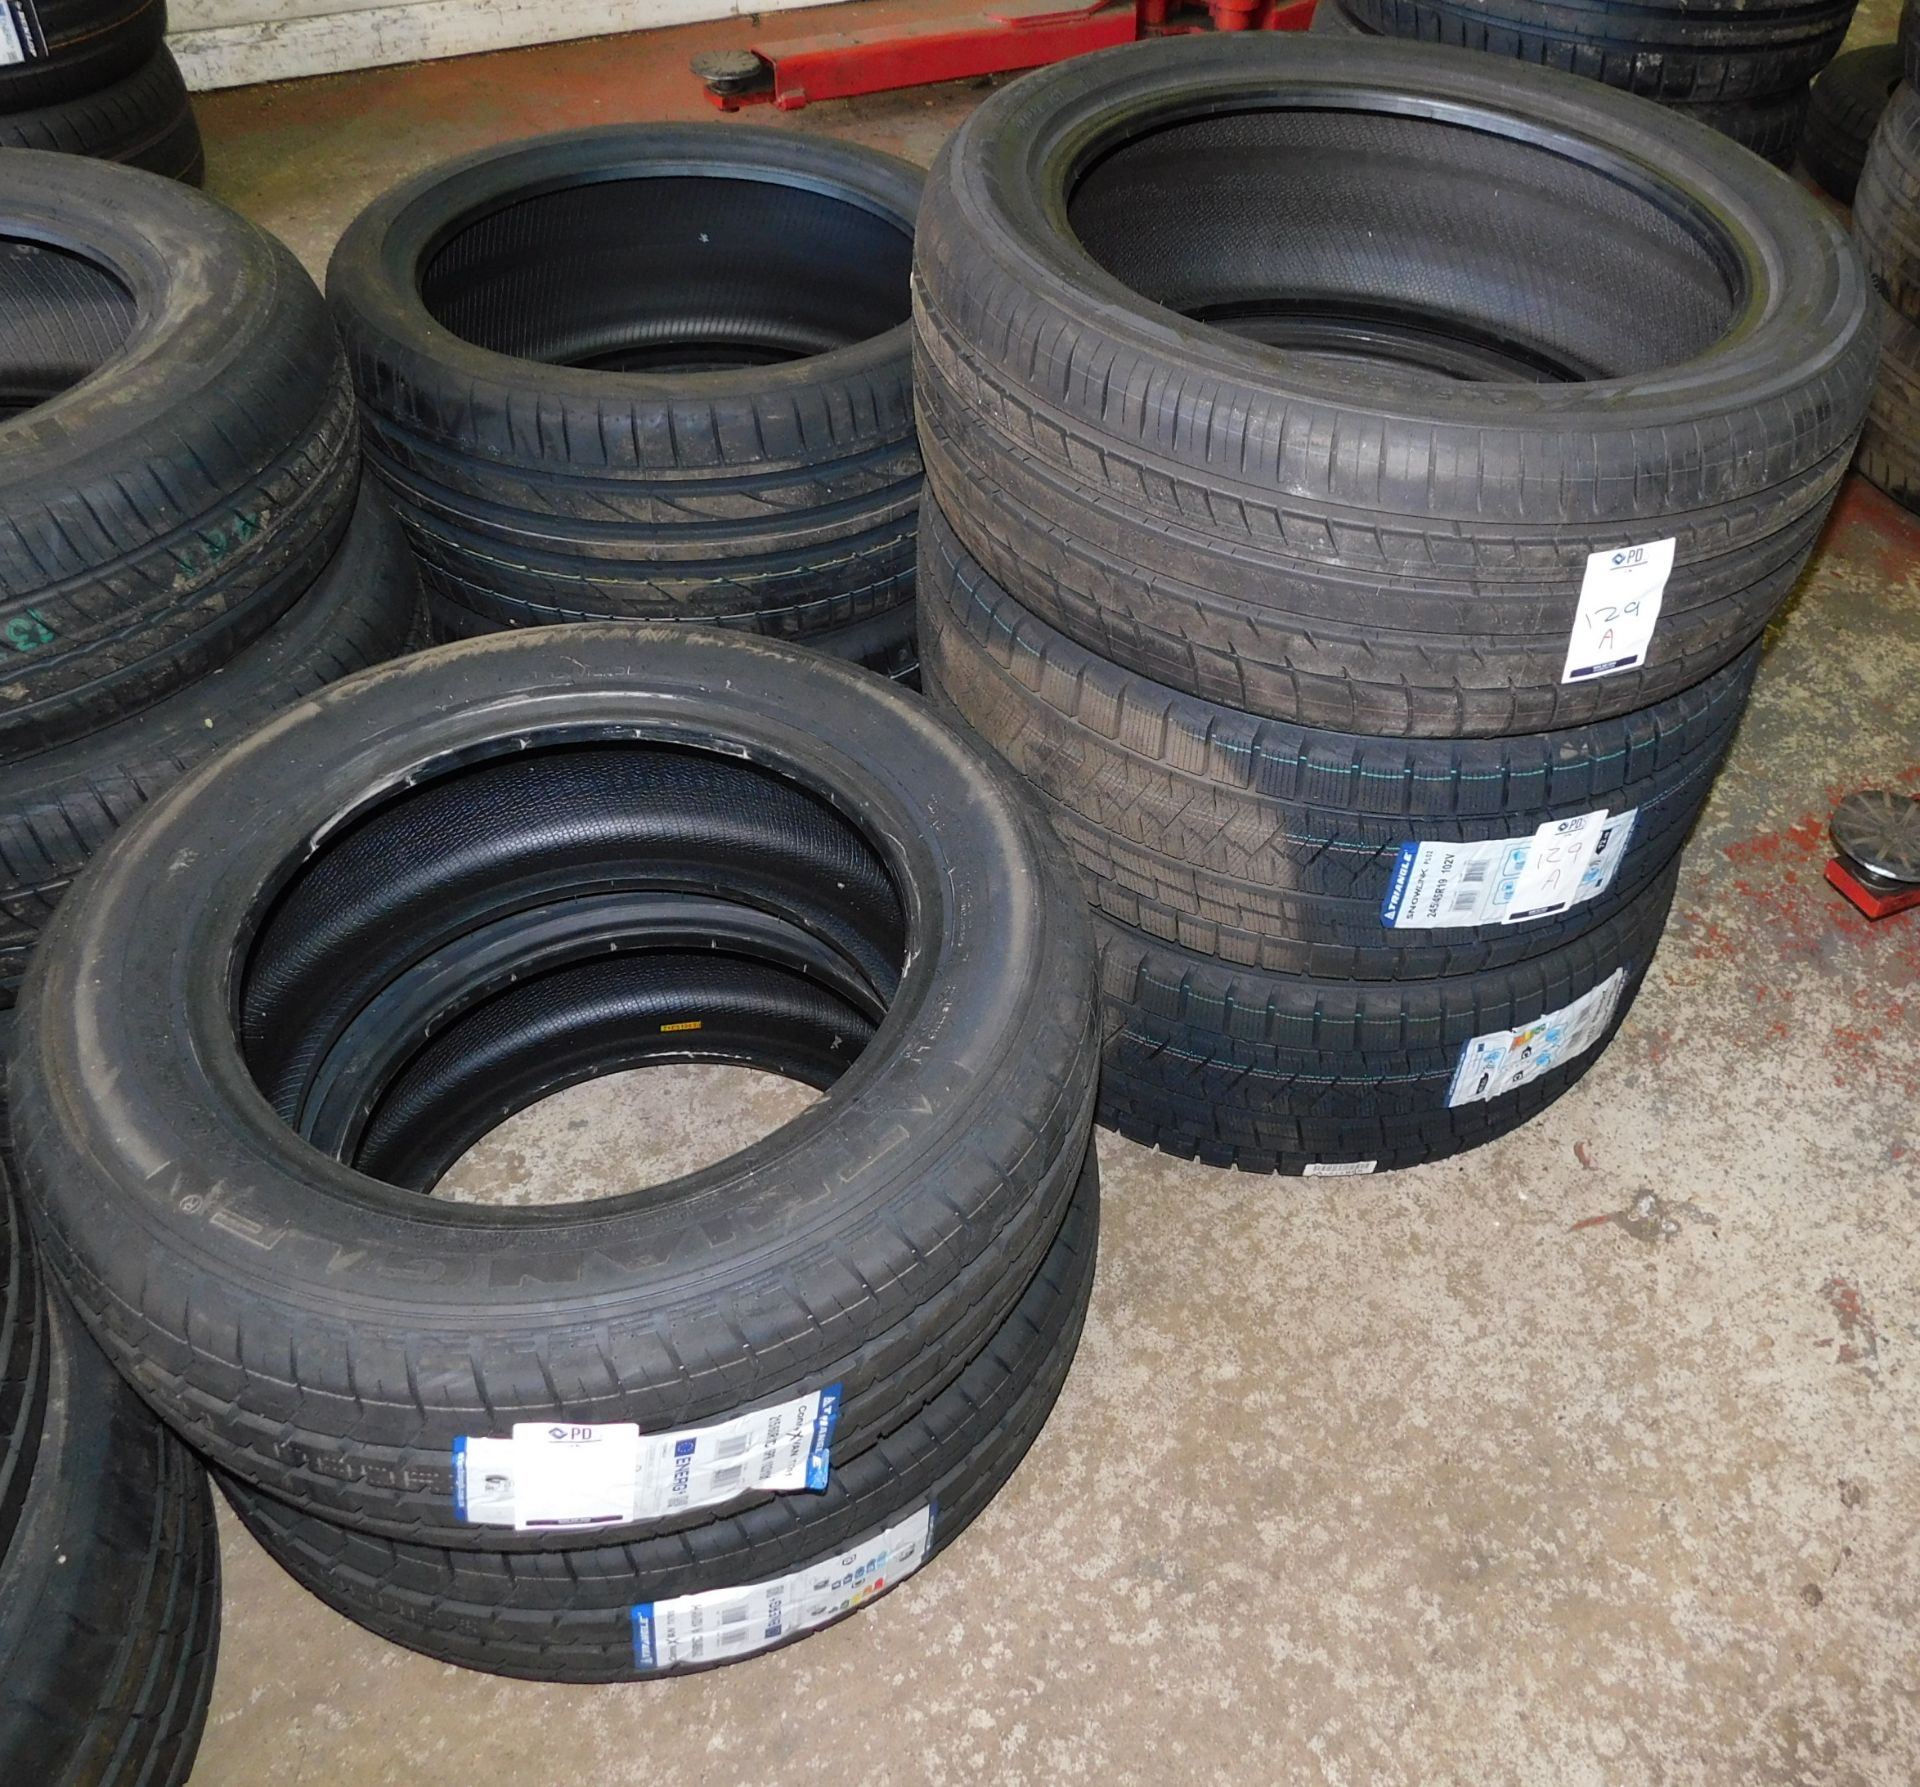 5 tyres, size 215/60 16 (2 Triangle) & size 245/45 19 (3 Triangle) (Location Northampton. Please